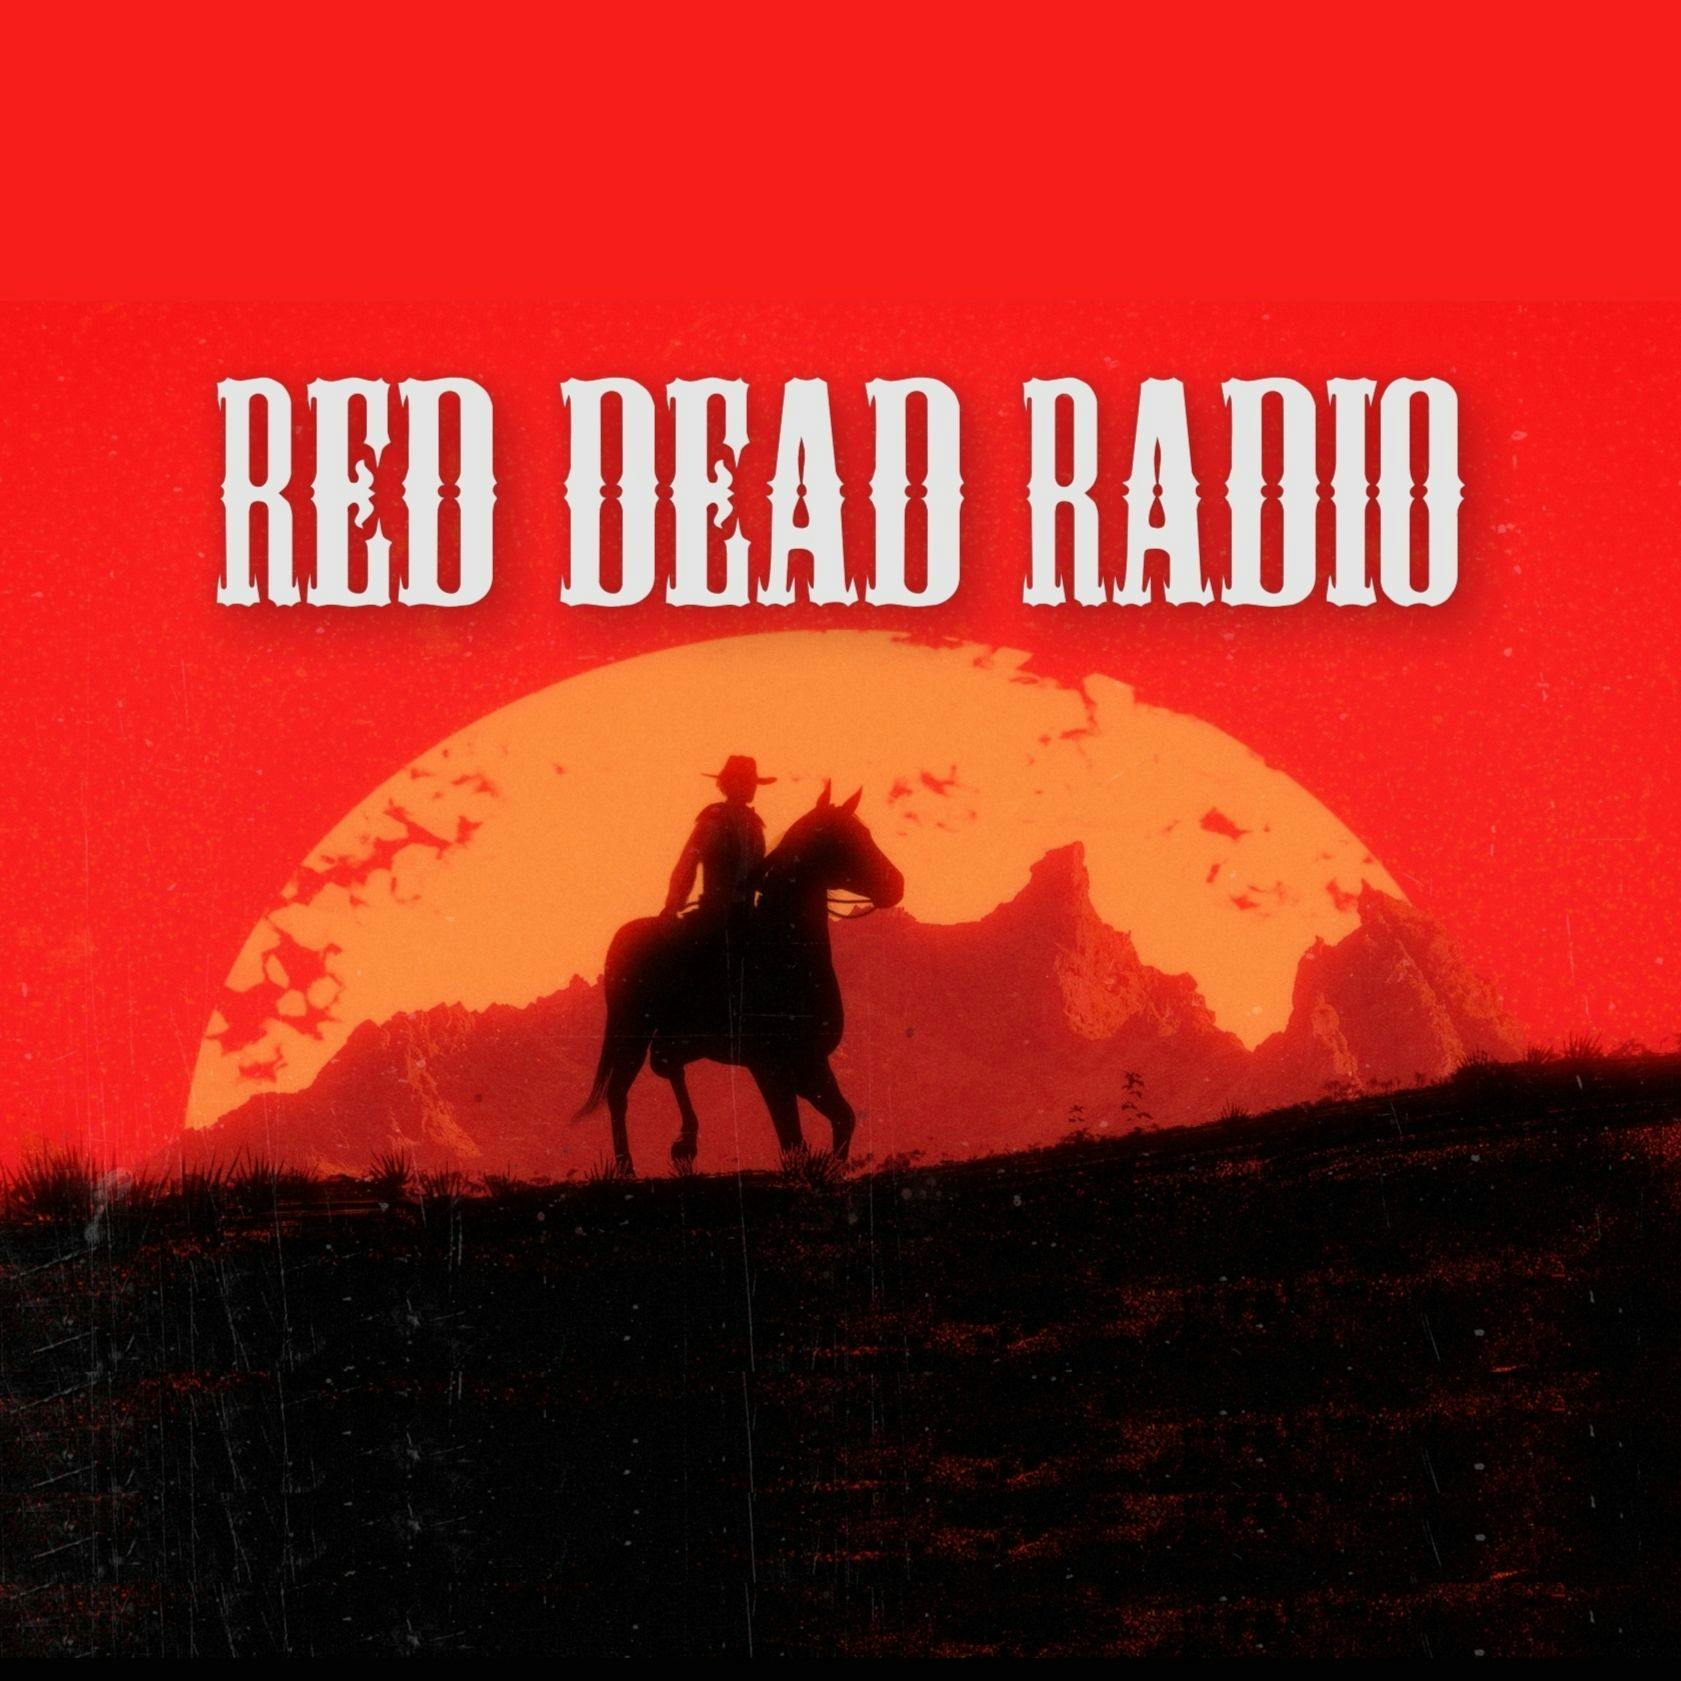 Red Dead Redemption 2 Review (Spoiler Free) Part 1 - Red Dead Radio Ep. 26